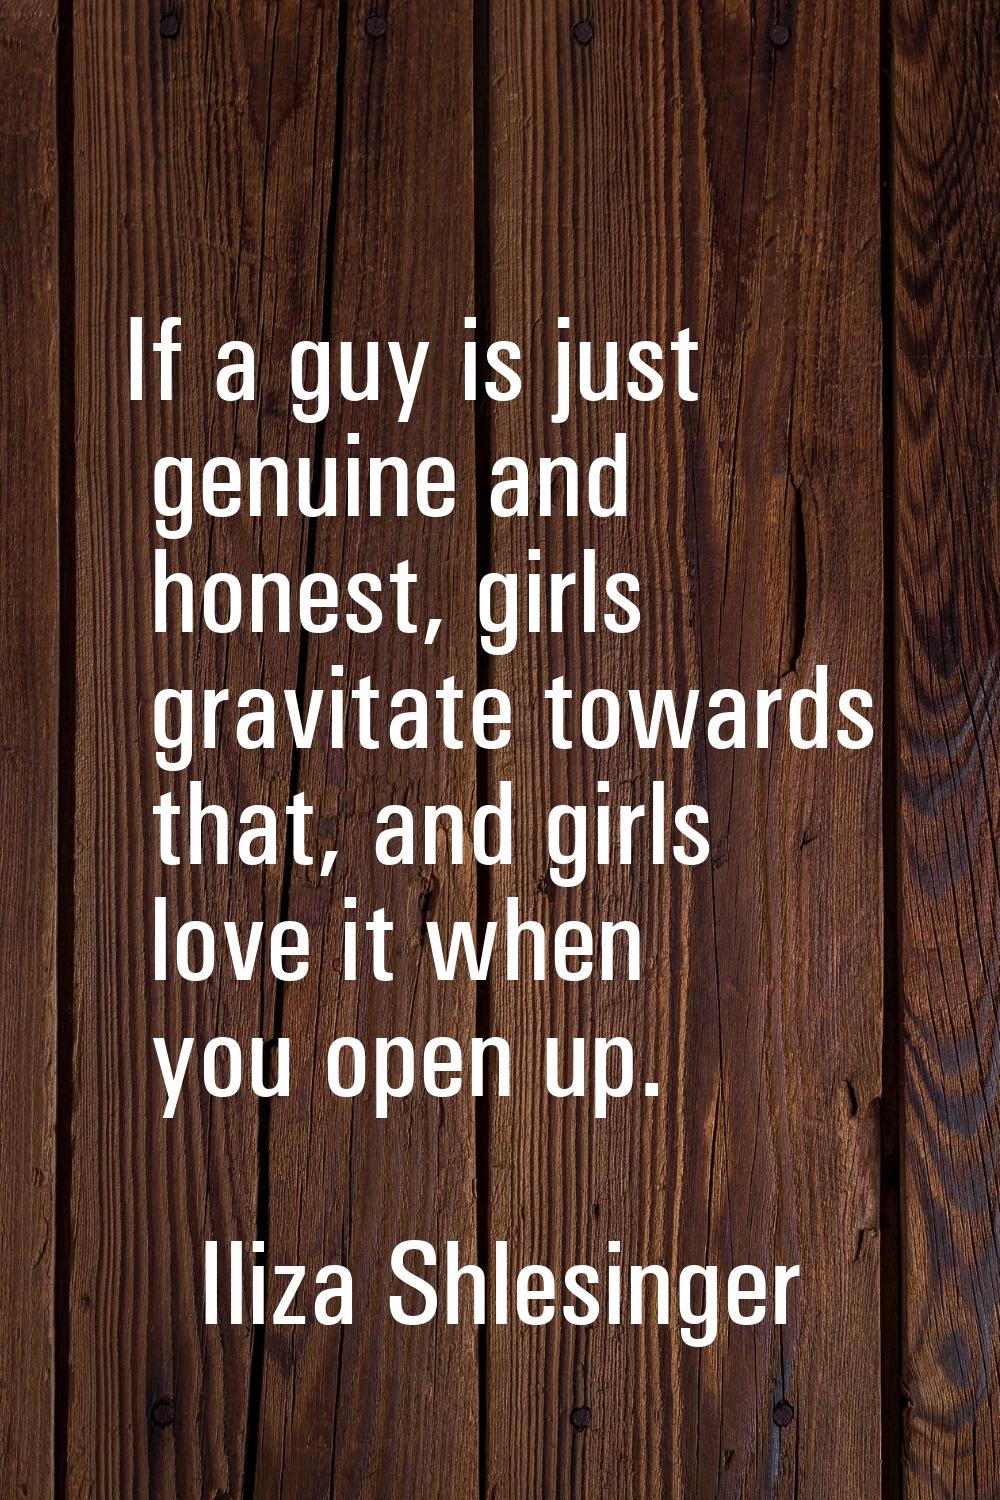 If a guy is just genuine and honest, girls gravitate towards that, and girls love it when you open 